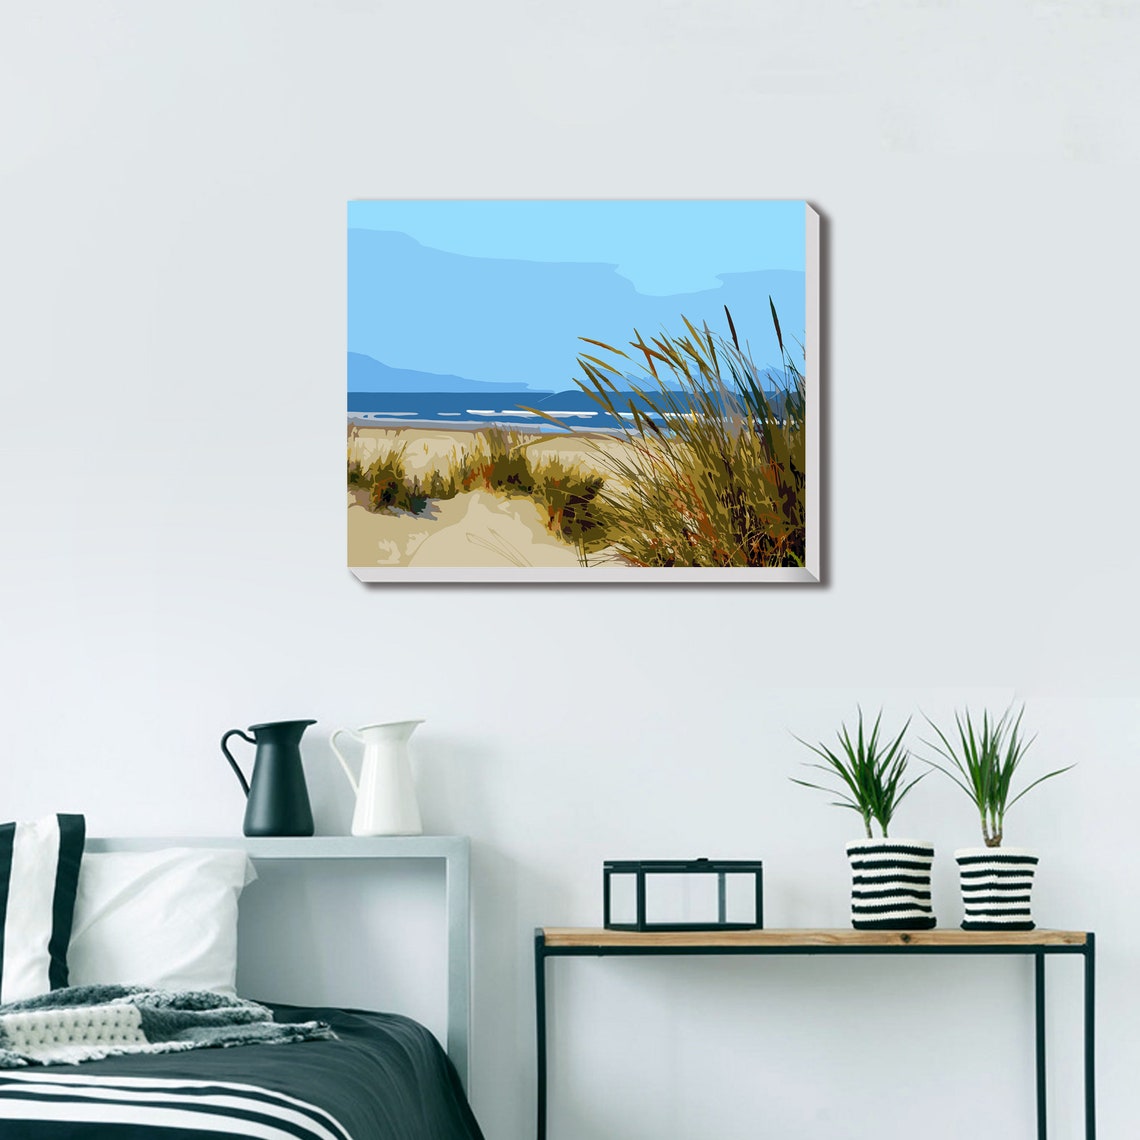 Boat on Beach - Paint by Number Kit DIY Oil Painting Kit on Wood